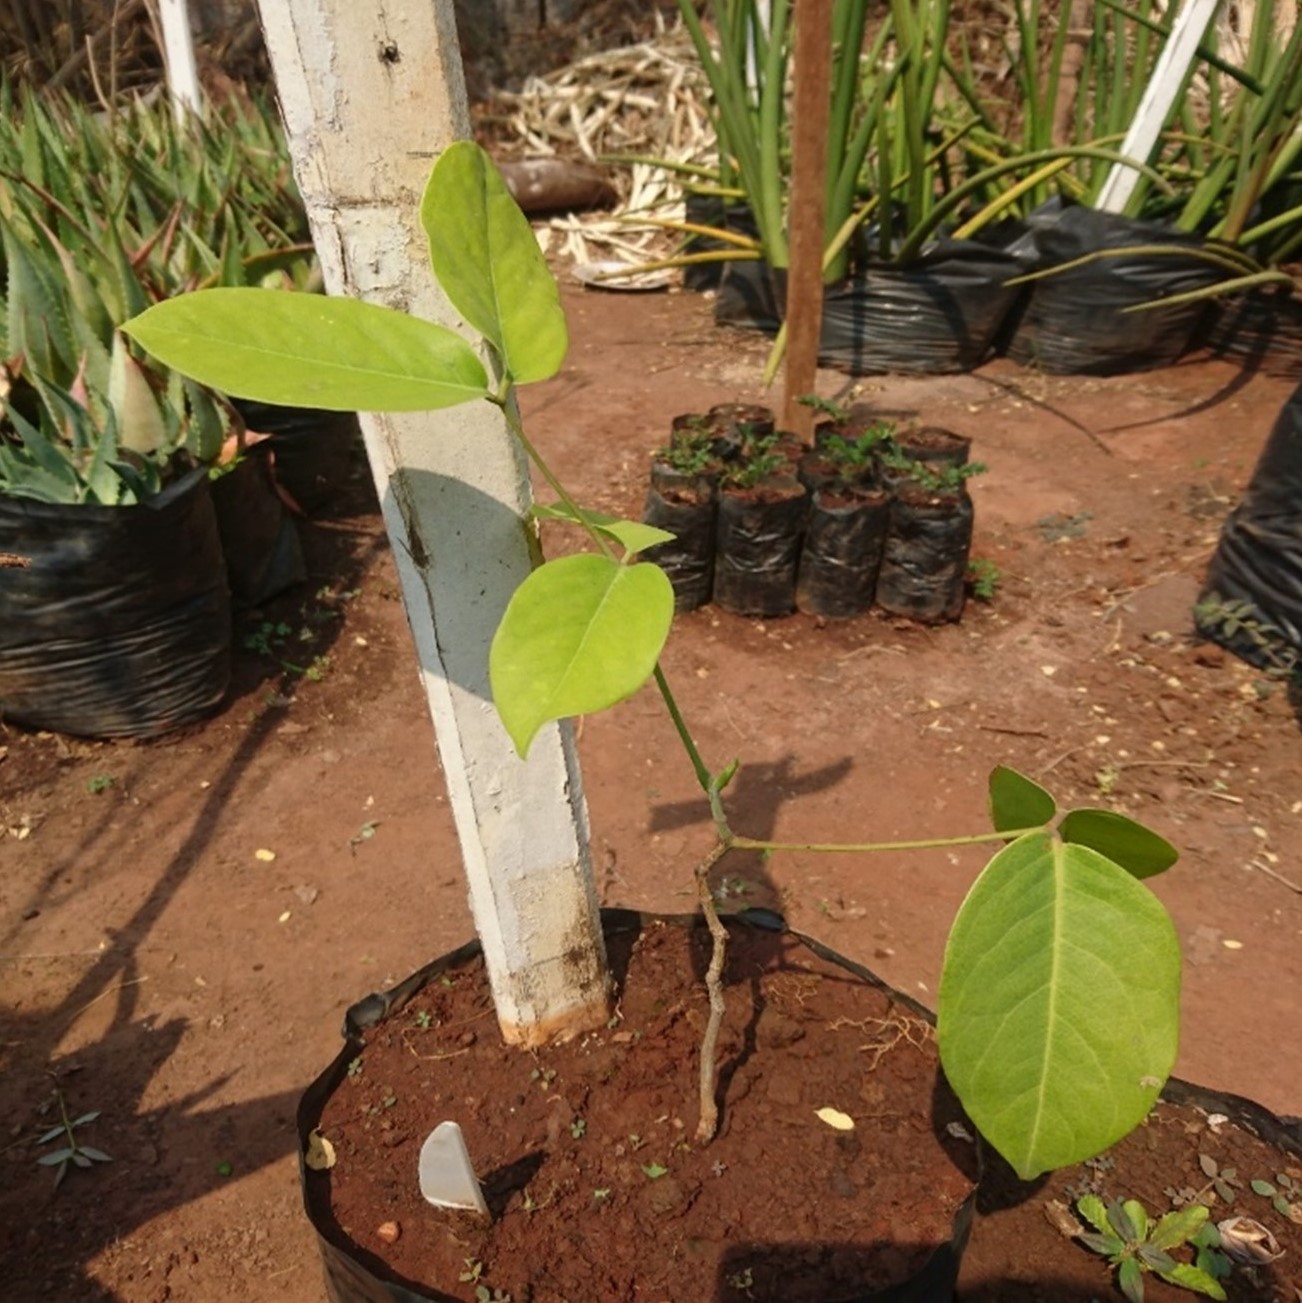 A pot with a single seedling growing showing the leaves with pairs of leaflets